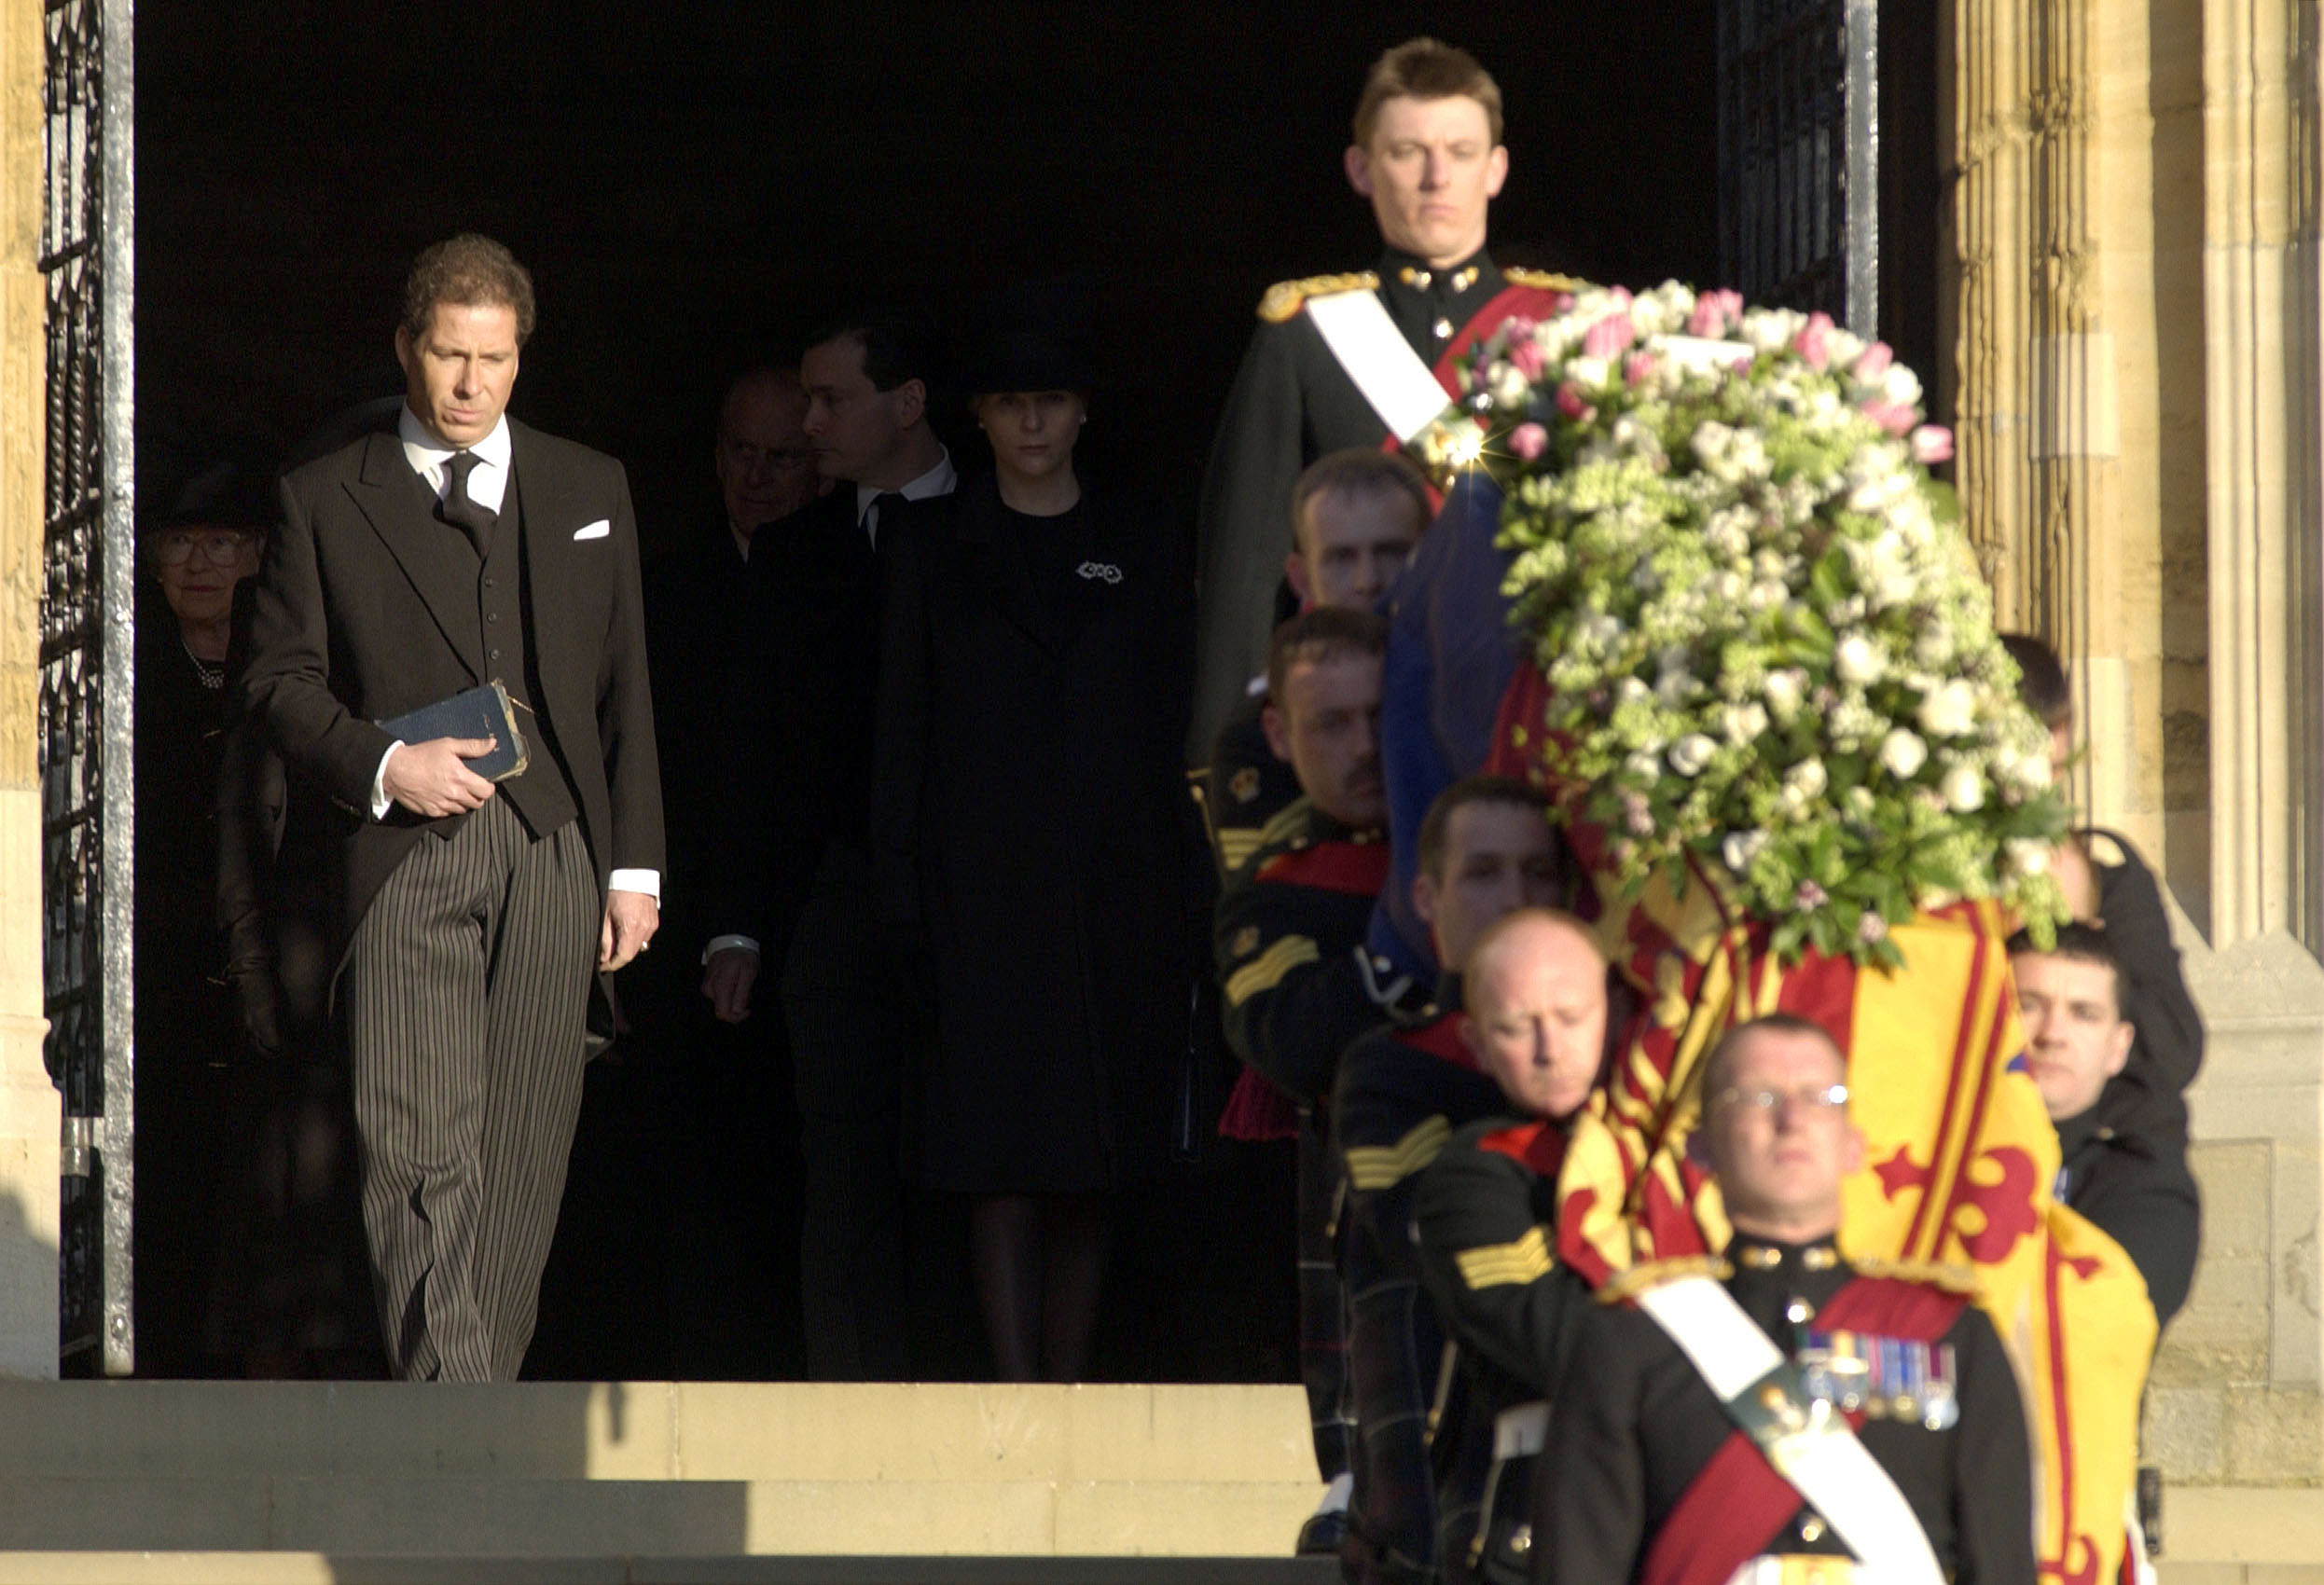 <p>David Armstrong-Jones, then known as Viscount Linley, followed mother Princess Margaret's coffin as it left St. George's Chapel at Windsor Castle during her funeral on Feb. 15, 2002. </p>